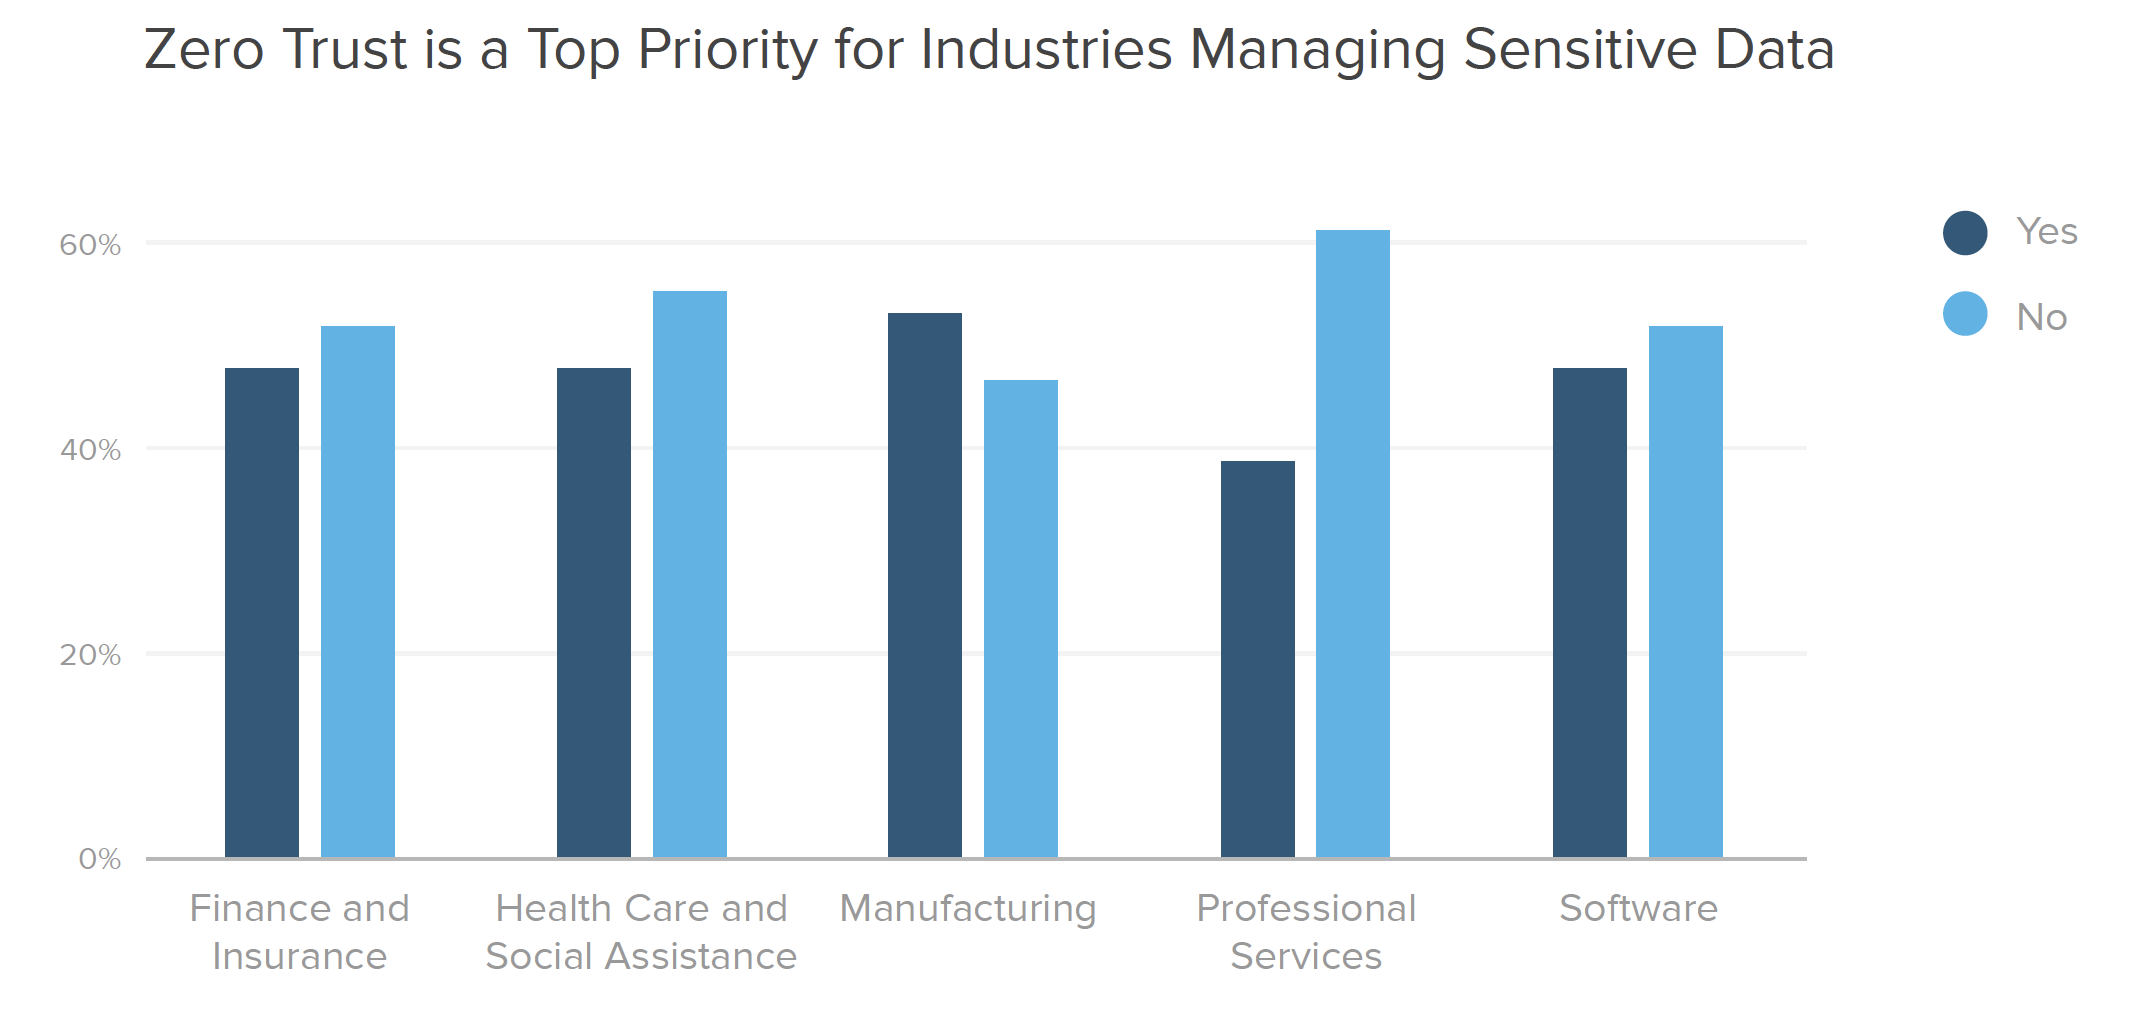 Zero Trust is a Top Priority for Industries Managing Sensitive Data